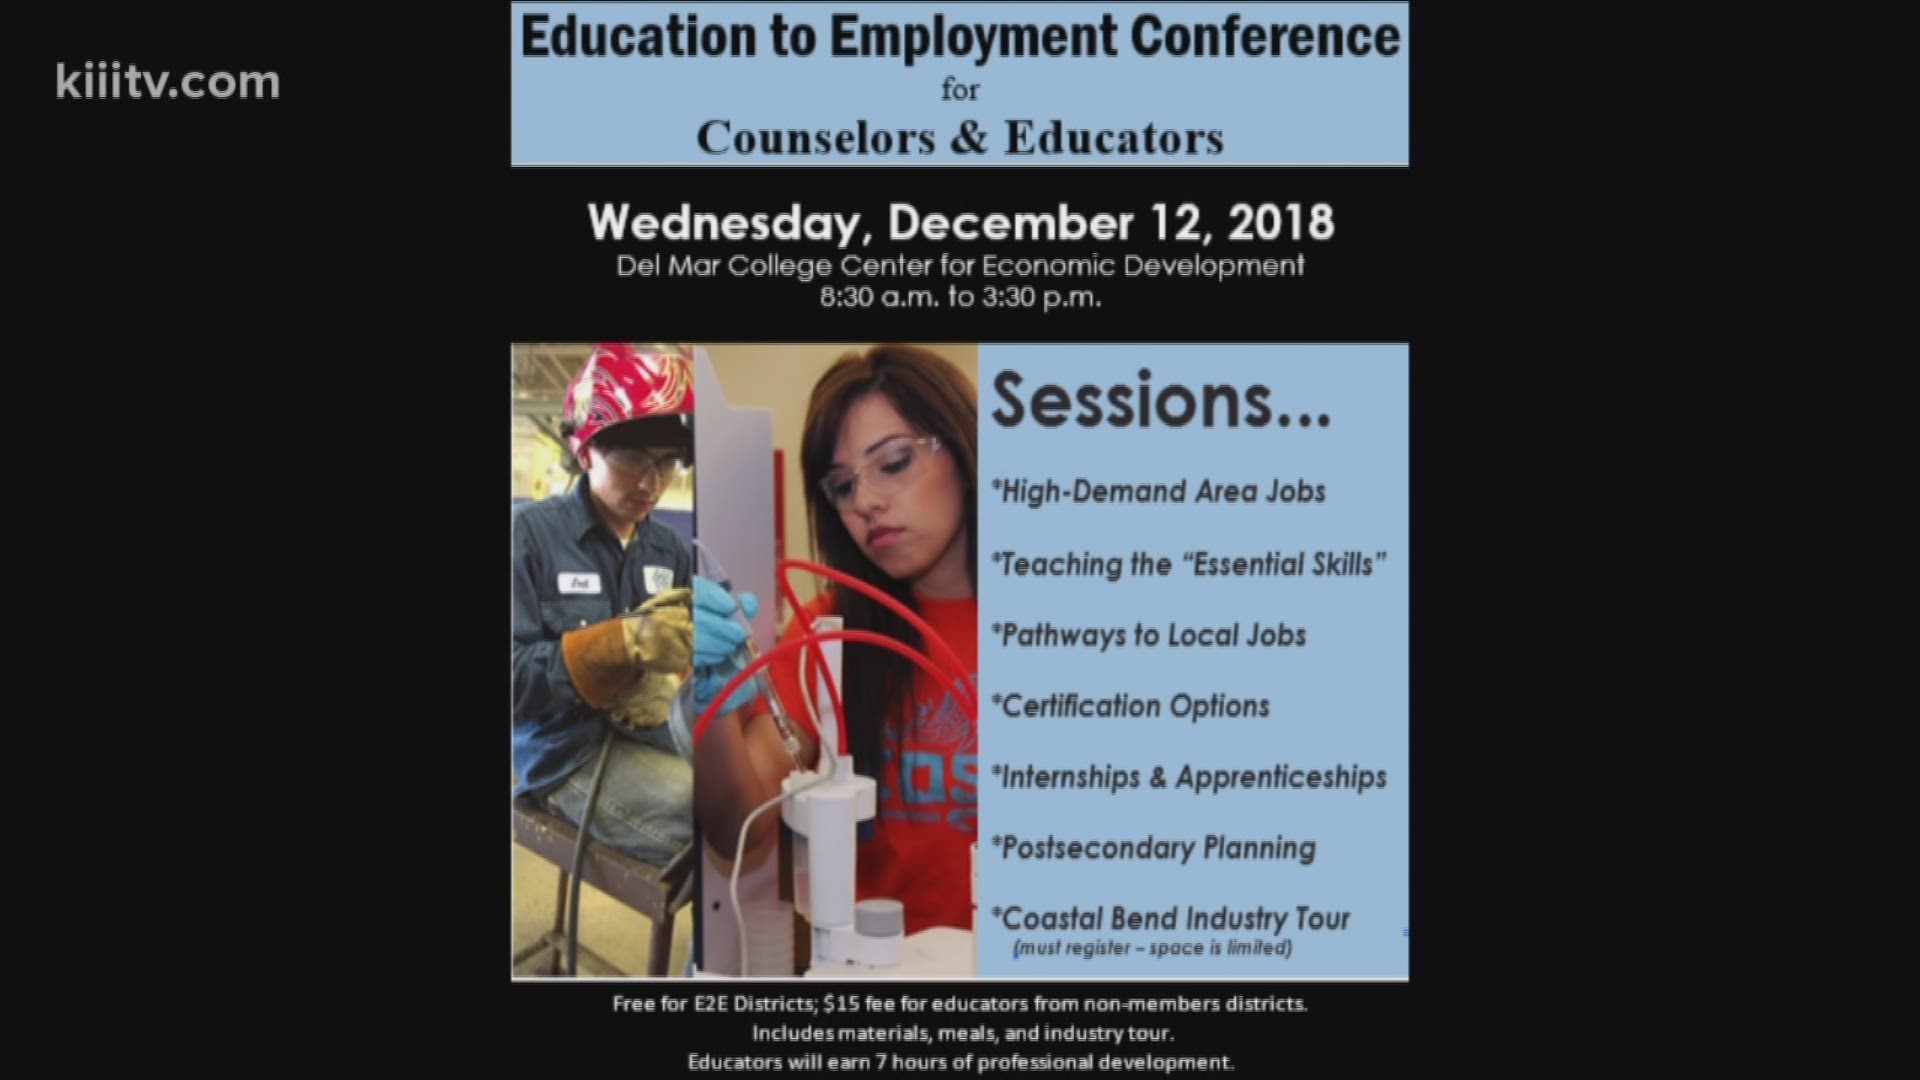 Counselors and educators are invited out to DMC Center for Economic Development on Wednesday, December 12, 2018 from 8:30 a.m. to 3:30 p.m.